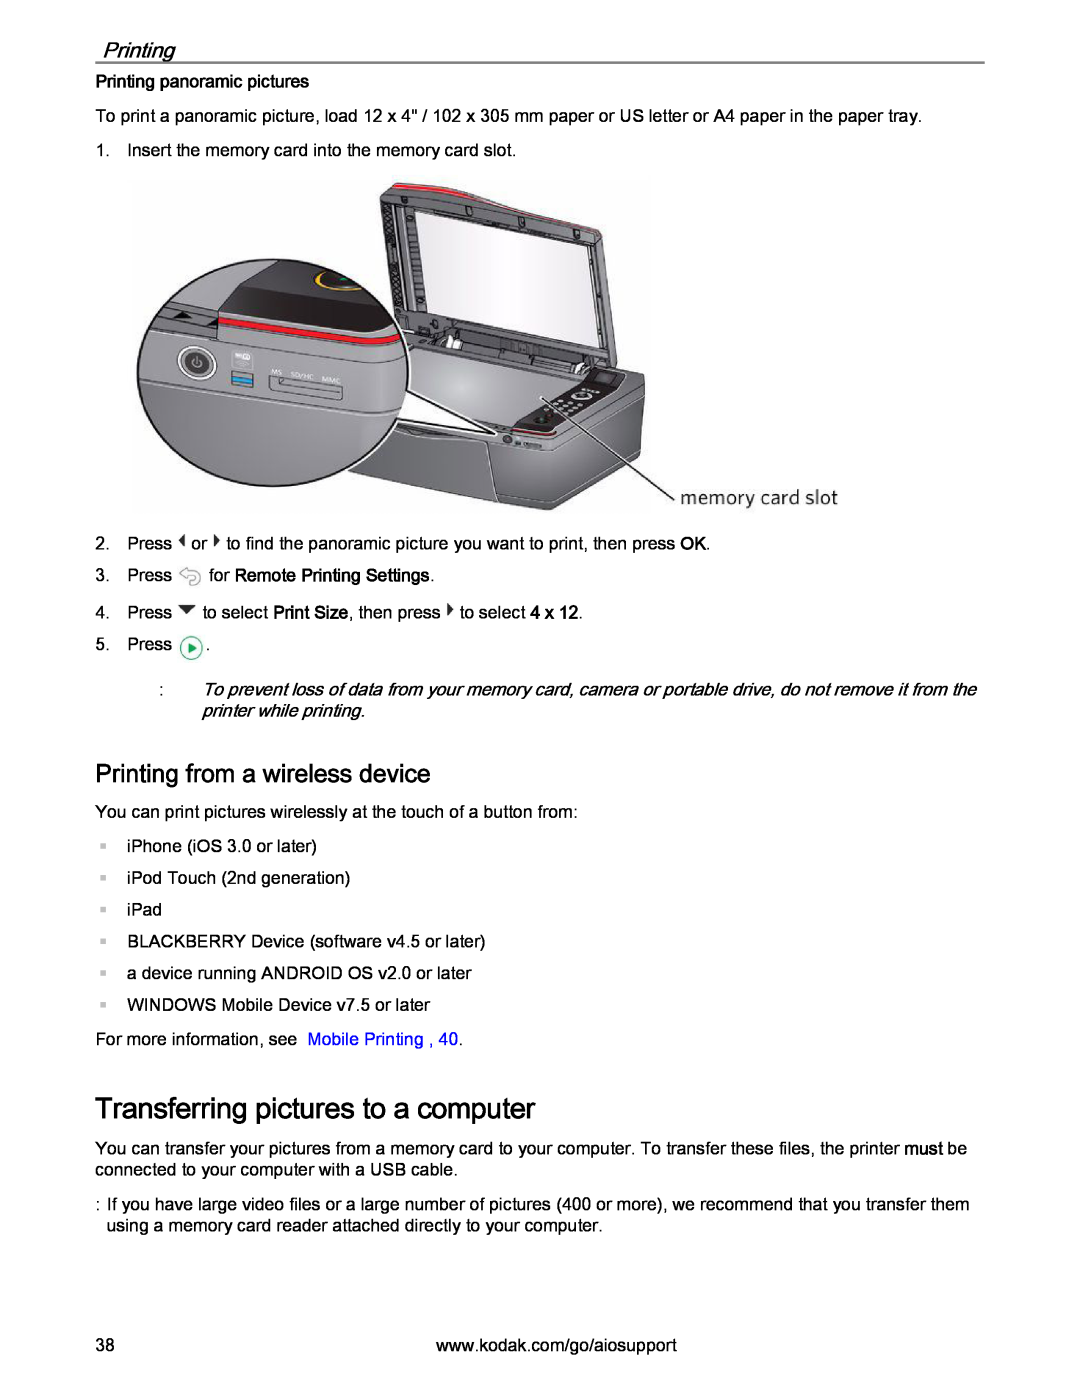 Kodak 2.2 manual Transferring pictures to a computer, Printing from a wireless device, Printing panoramic pictures 